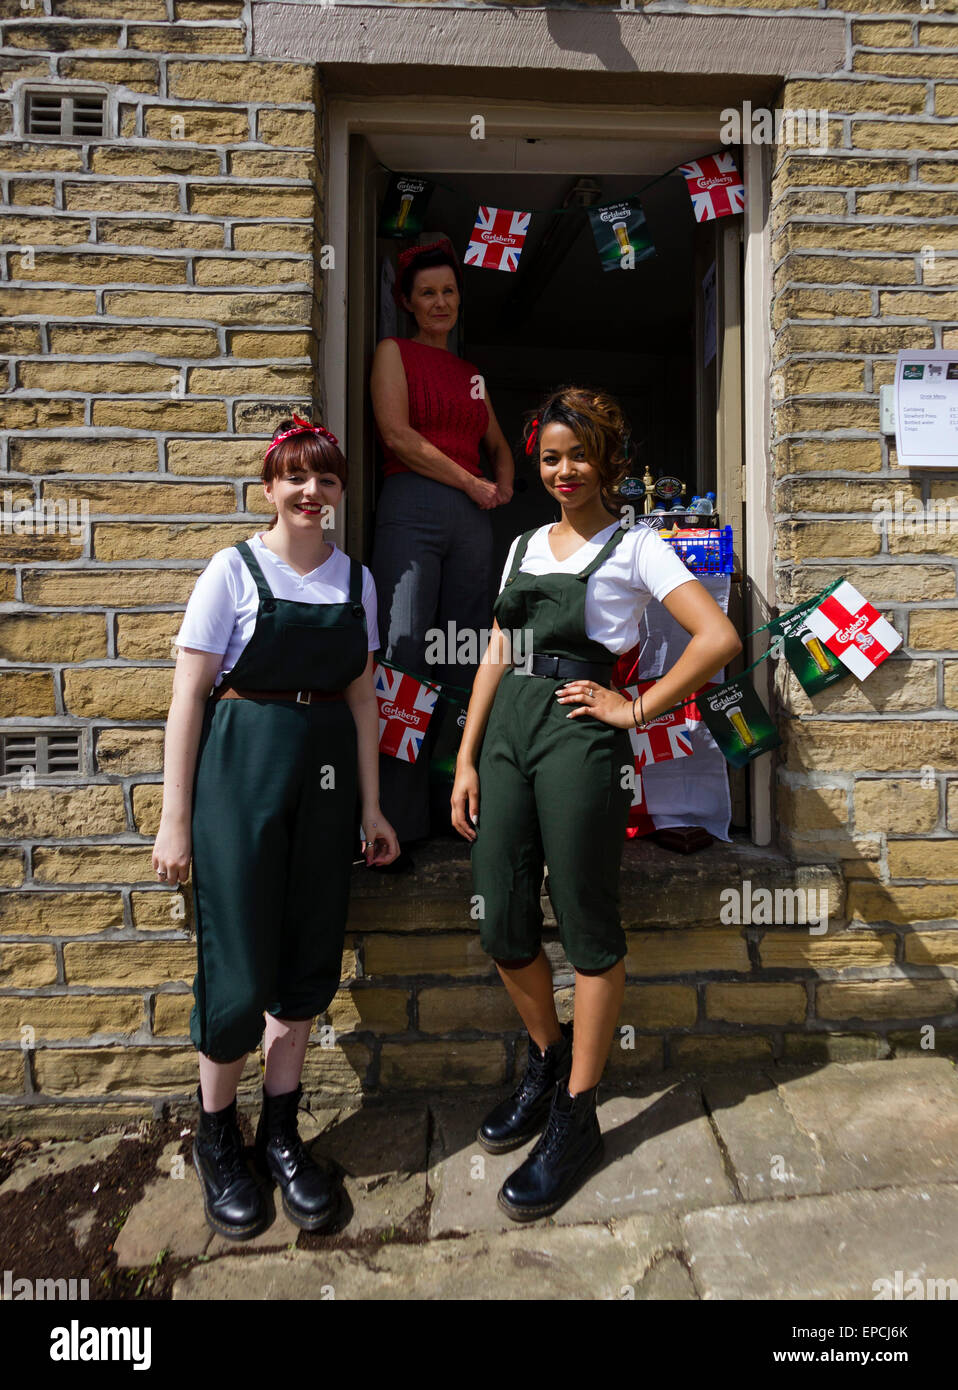 Haworth, West Yorkshire, UK. 16th May, 2015. Three women in costume operating a pop up cafe at Haworth 1940s weekend, an annual event in which people dress in period costume and visit the village of Haworth to relive the 1940s. After complaints in previous years, the organisers have requested that people don't wear German Uniforms. Credit:  West Yorkshire Images/Alamy Live News Stock Photo